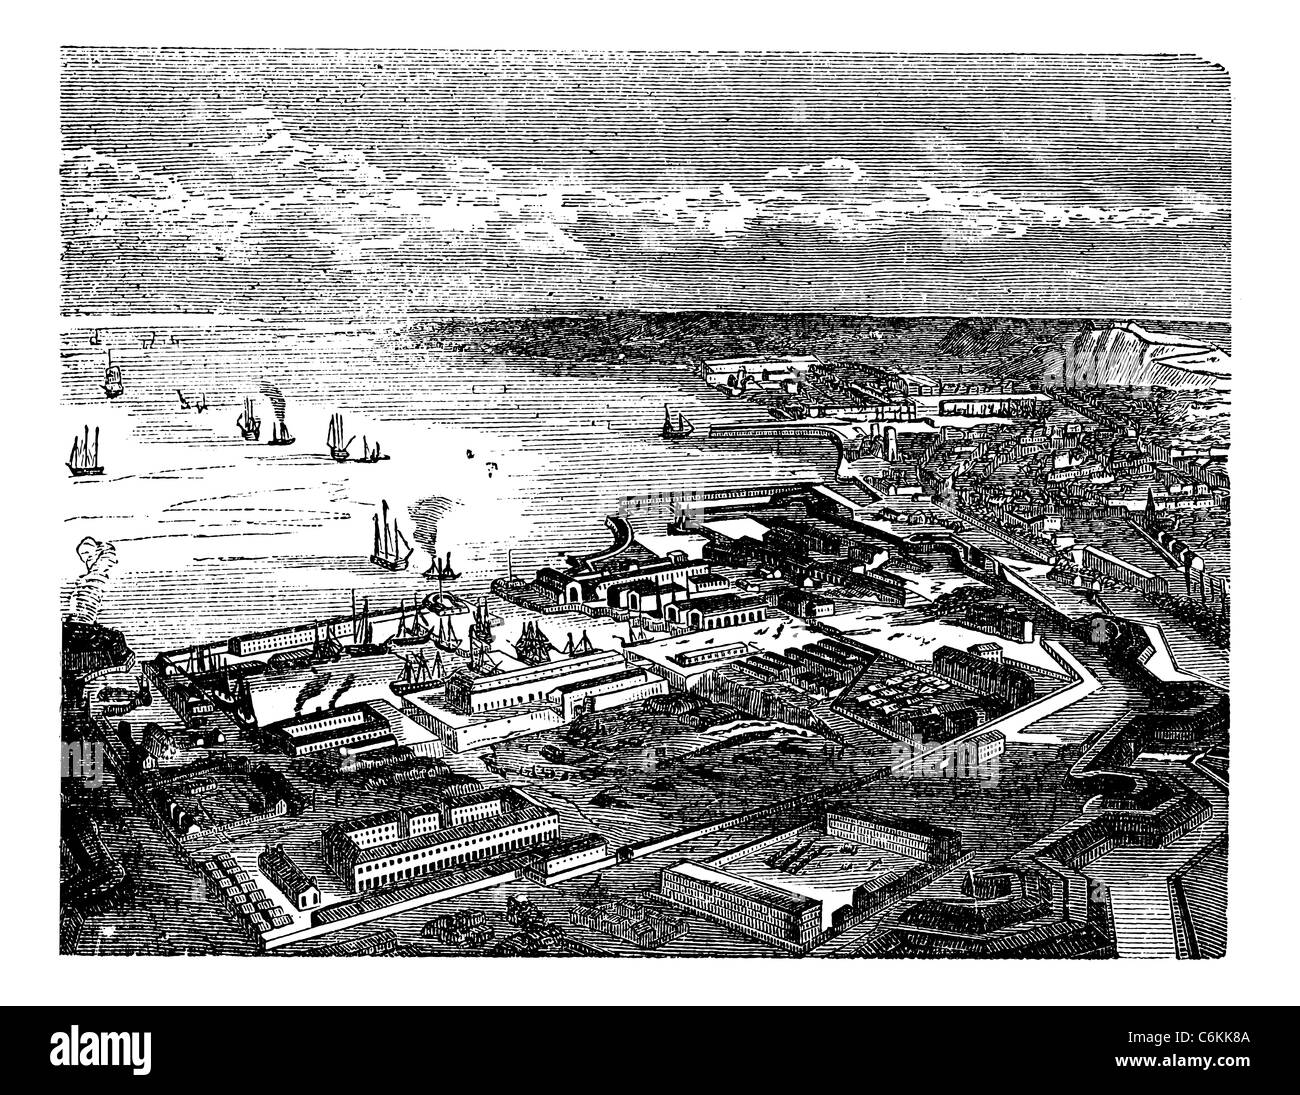 Cherbourg-Octeville, in Normandy, France, during the 1890s, vintage engraving. Old engraved illustration of Cherbourg-Octeville. Stock Photo